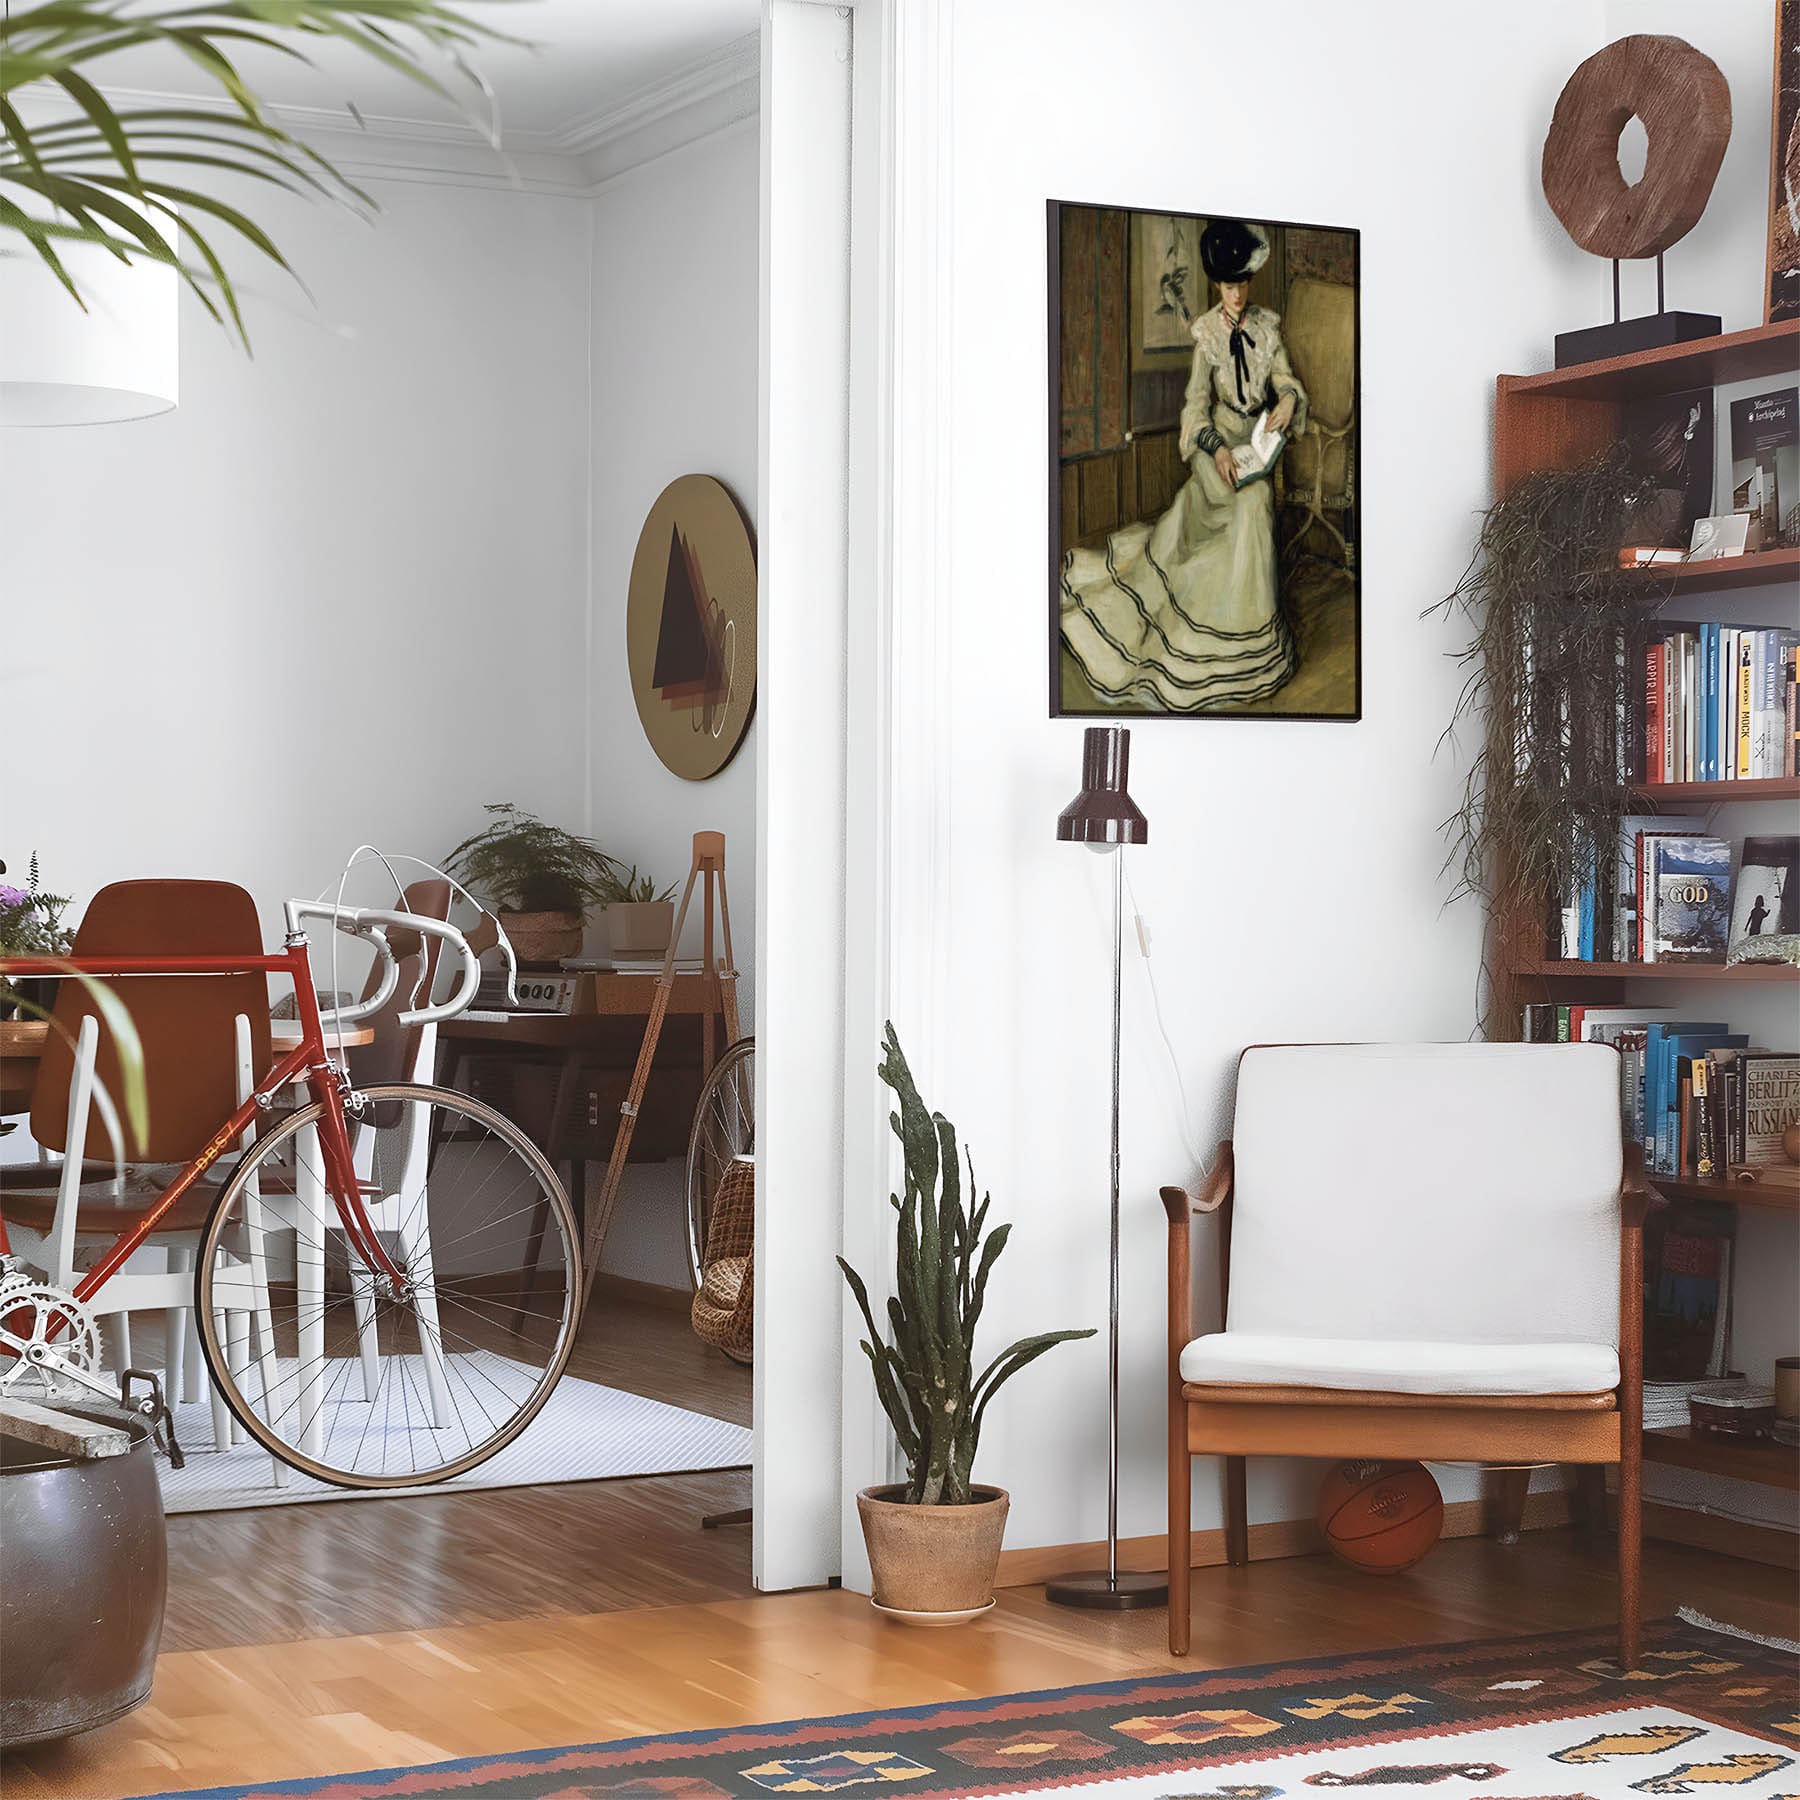 Eclectic living room with a road bike, bookshelf and house plants that features framed artwork of a Elegant Woman Reading above a chair and lamp